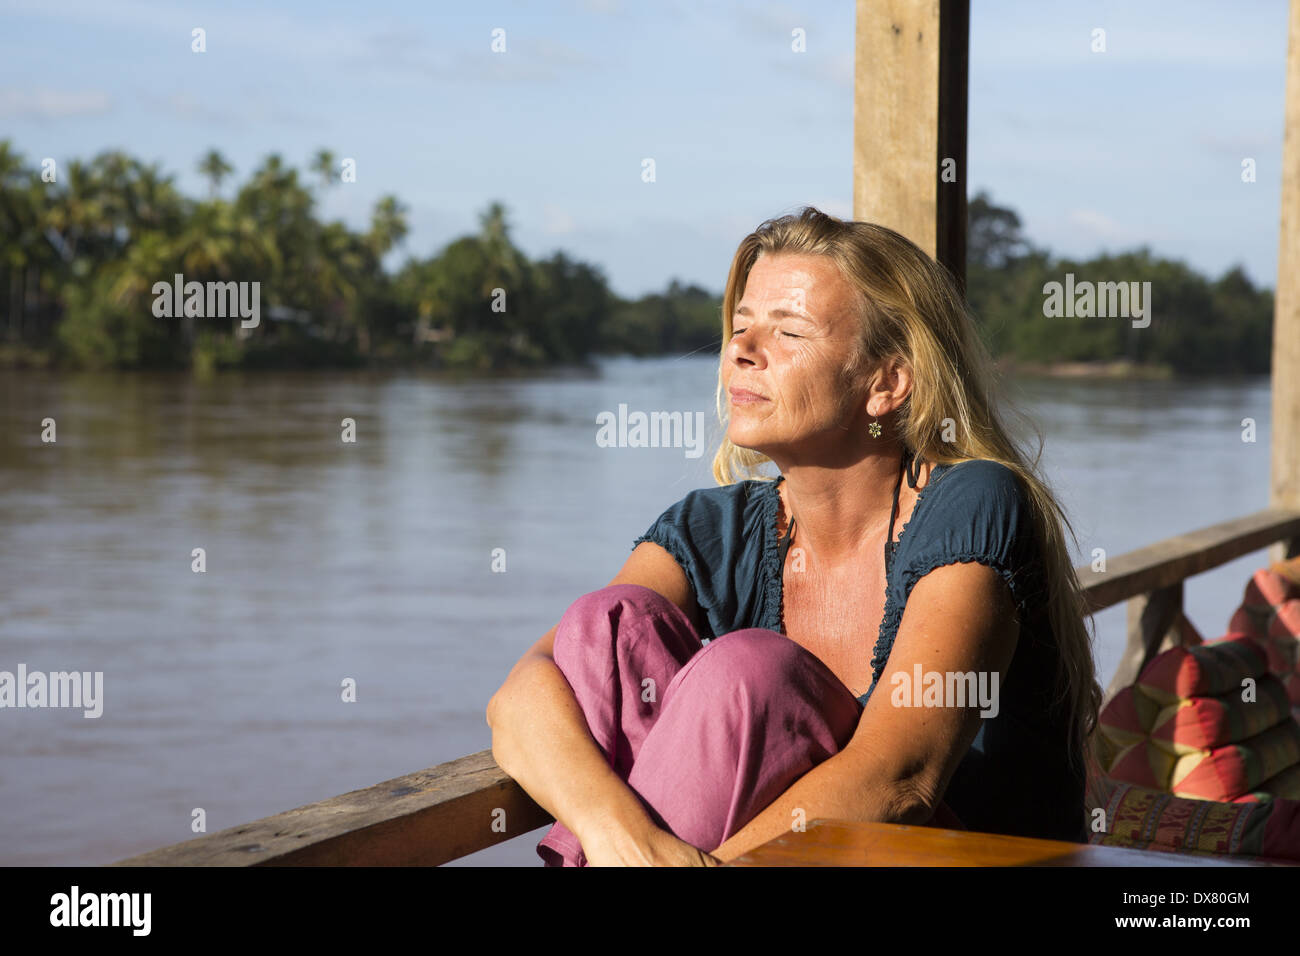 Don Khon island in the Mekong River, 4000 Islands in Southern Laos Stock Photo